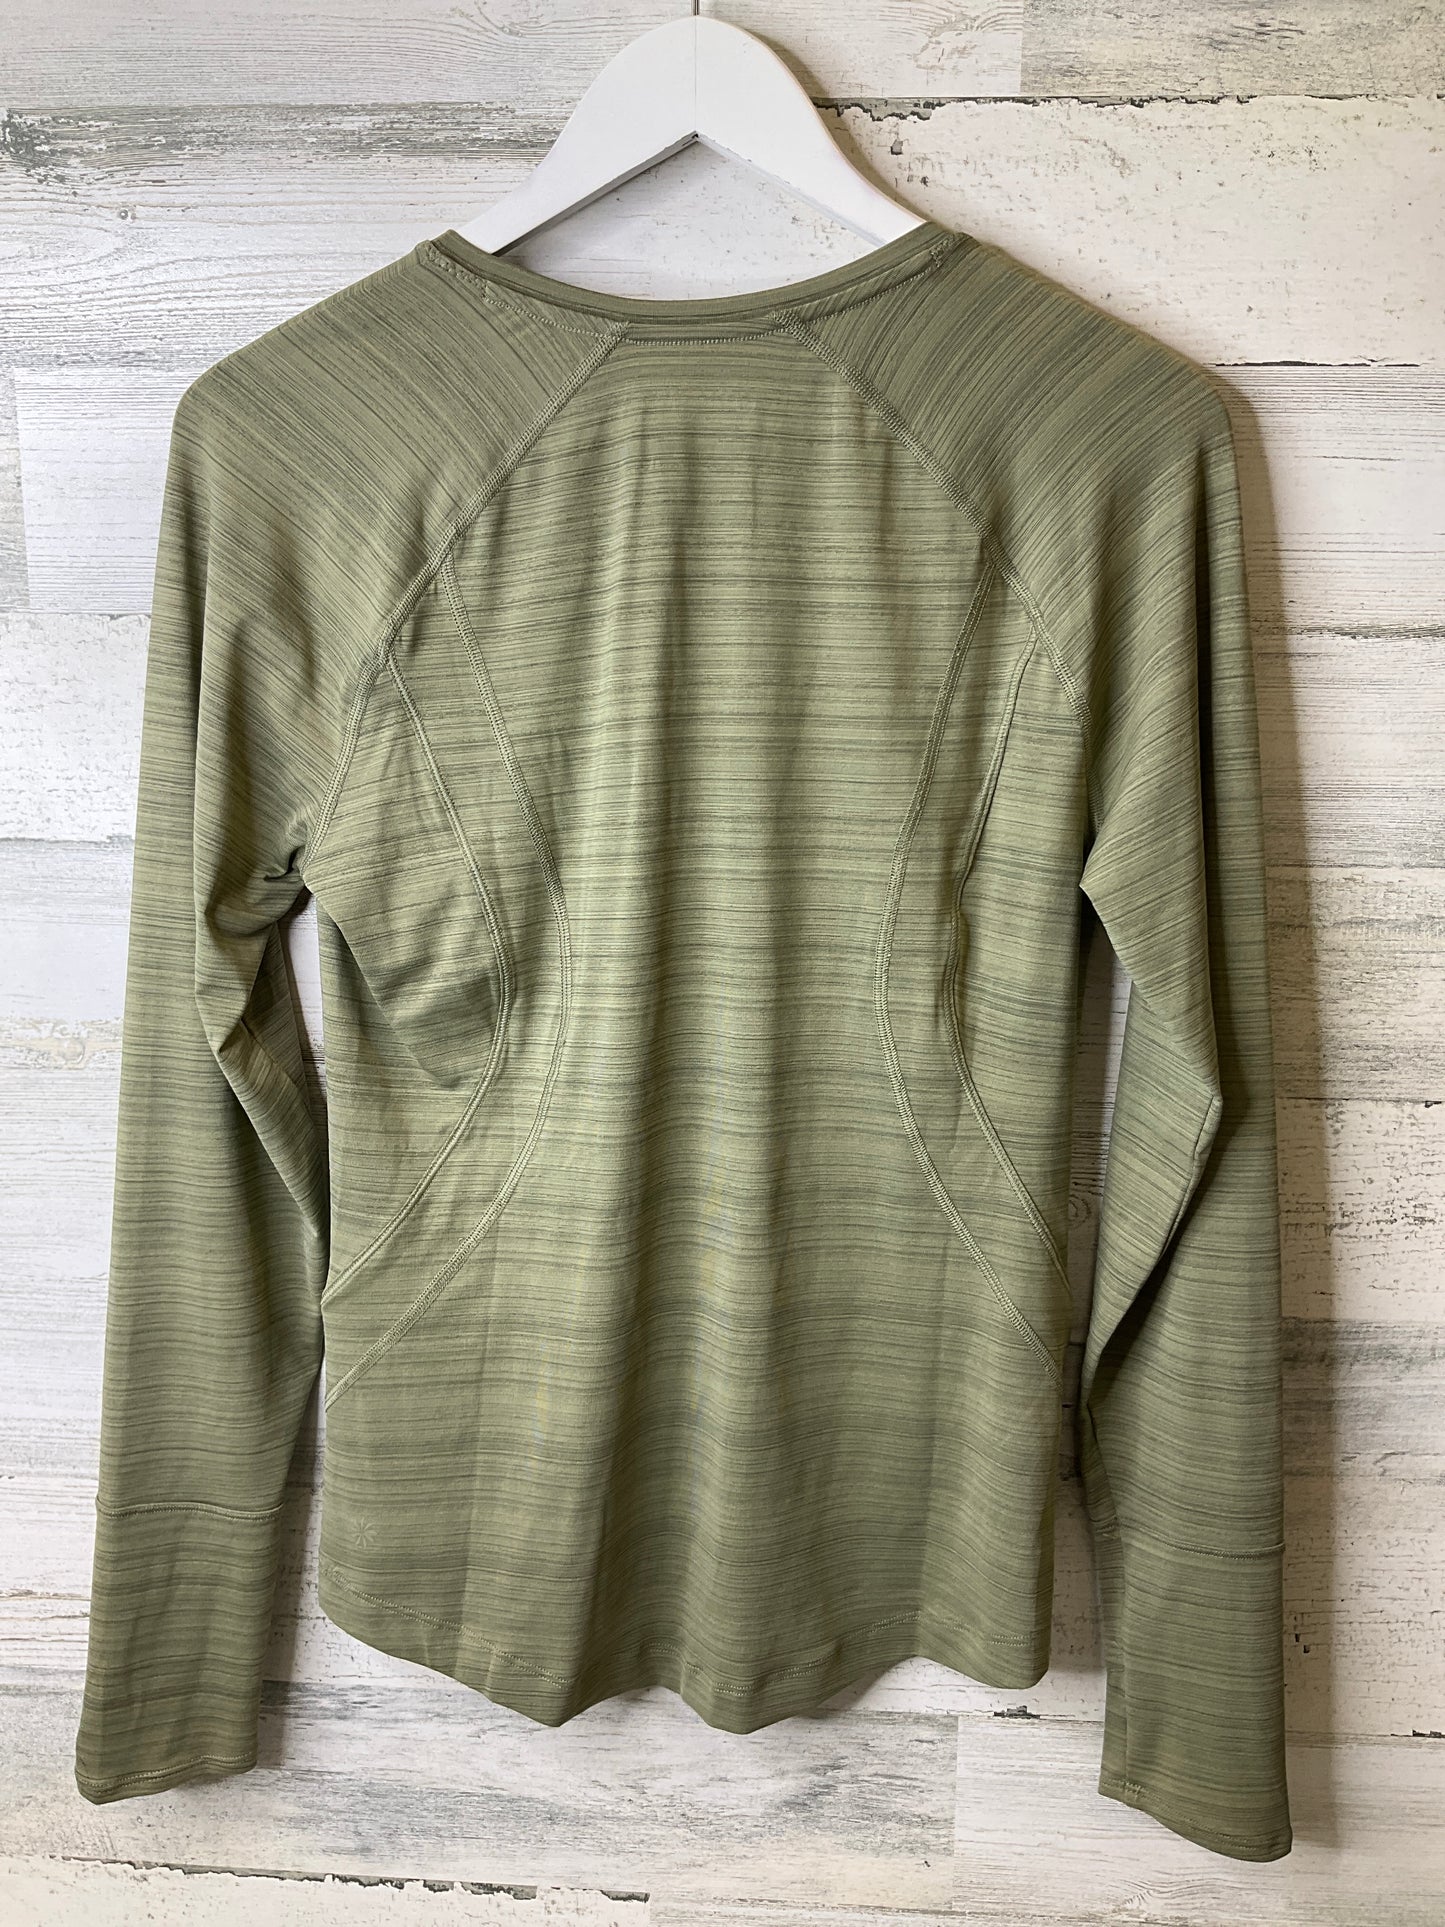 Athletic Top Long Sleeve Collar By Athleta  Size: Petite   Small